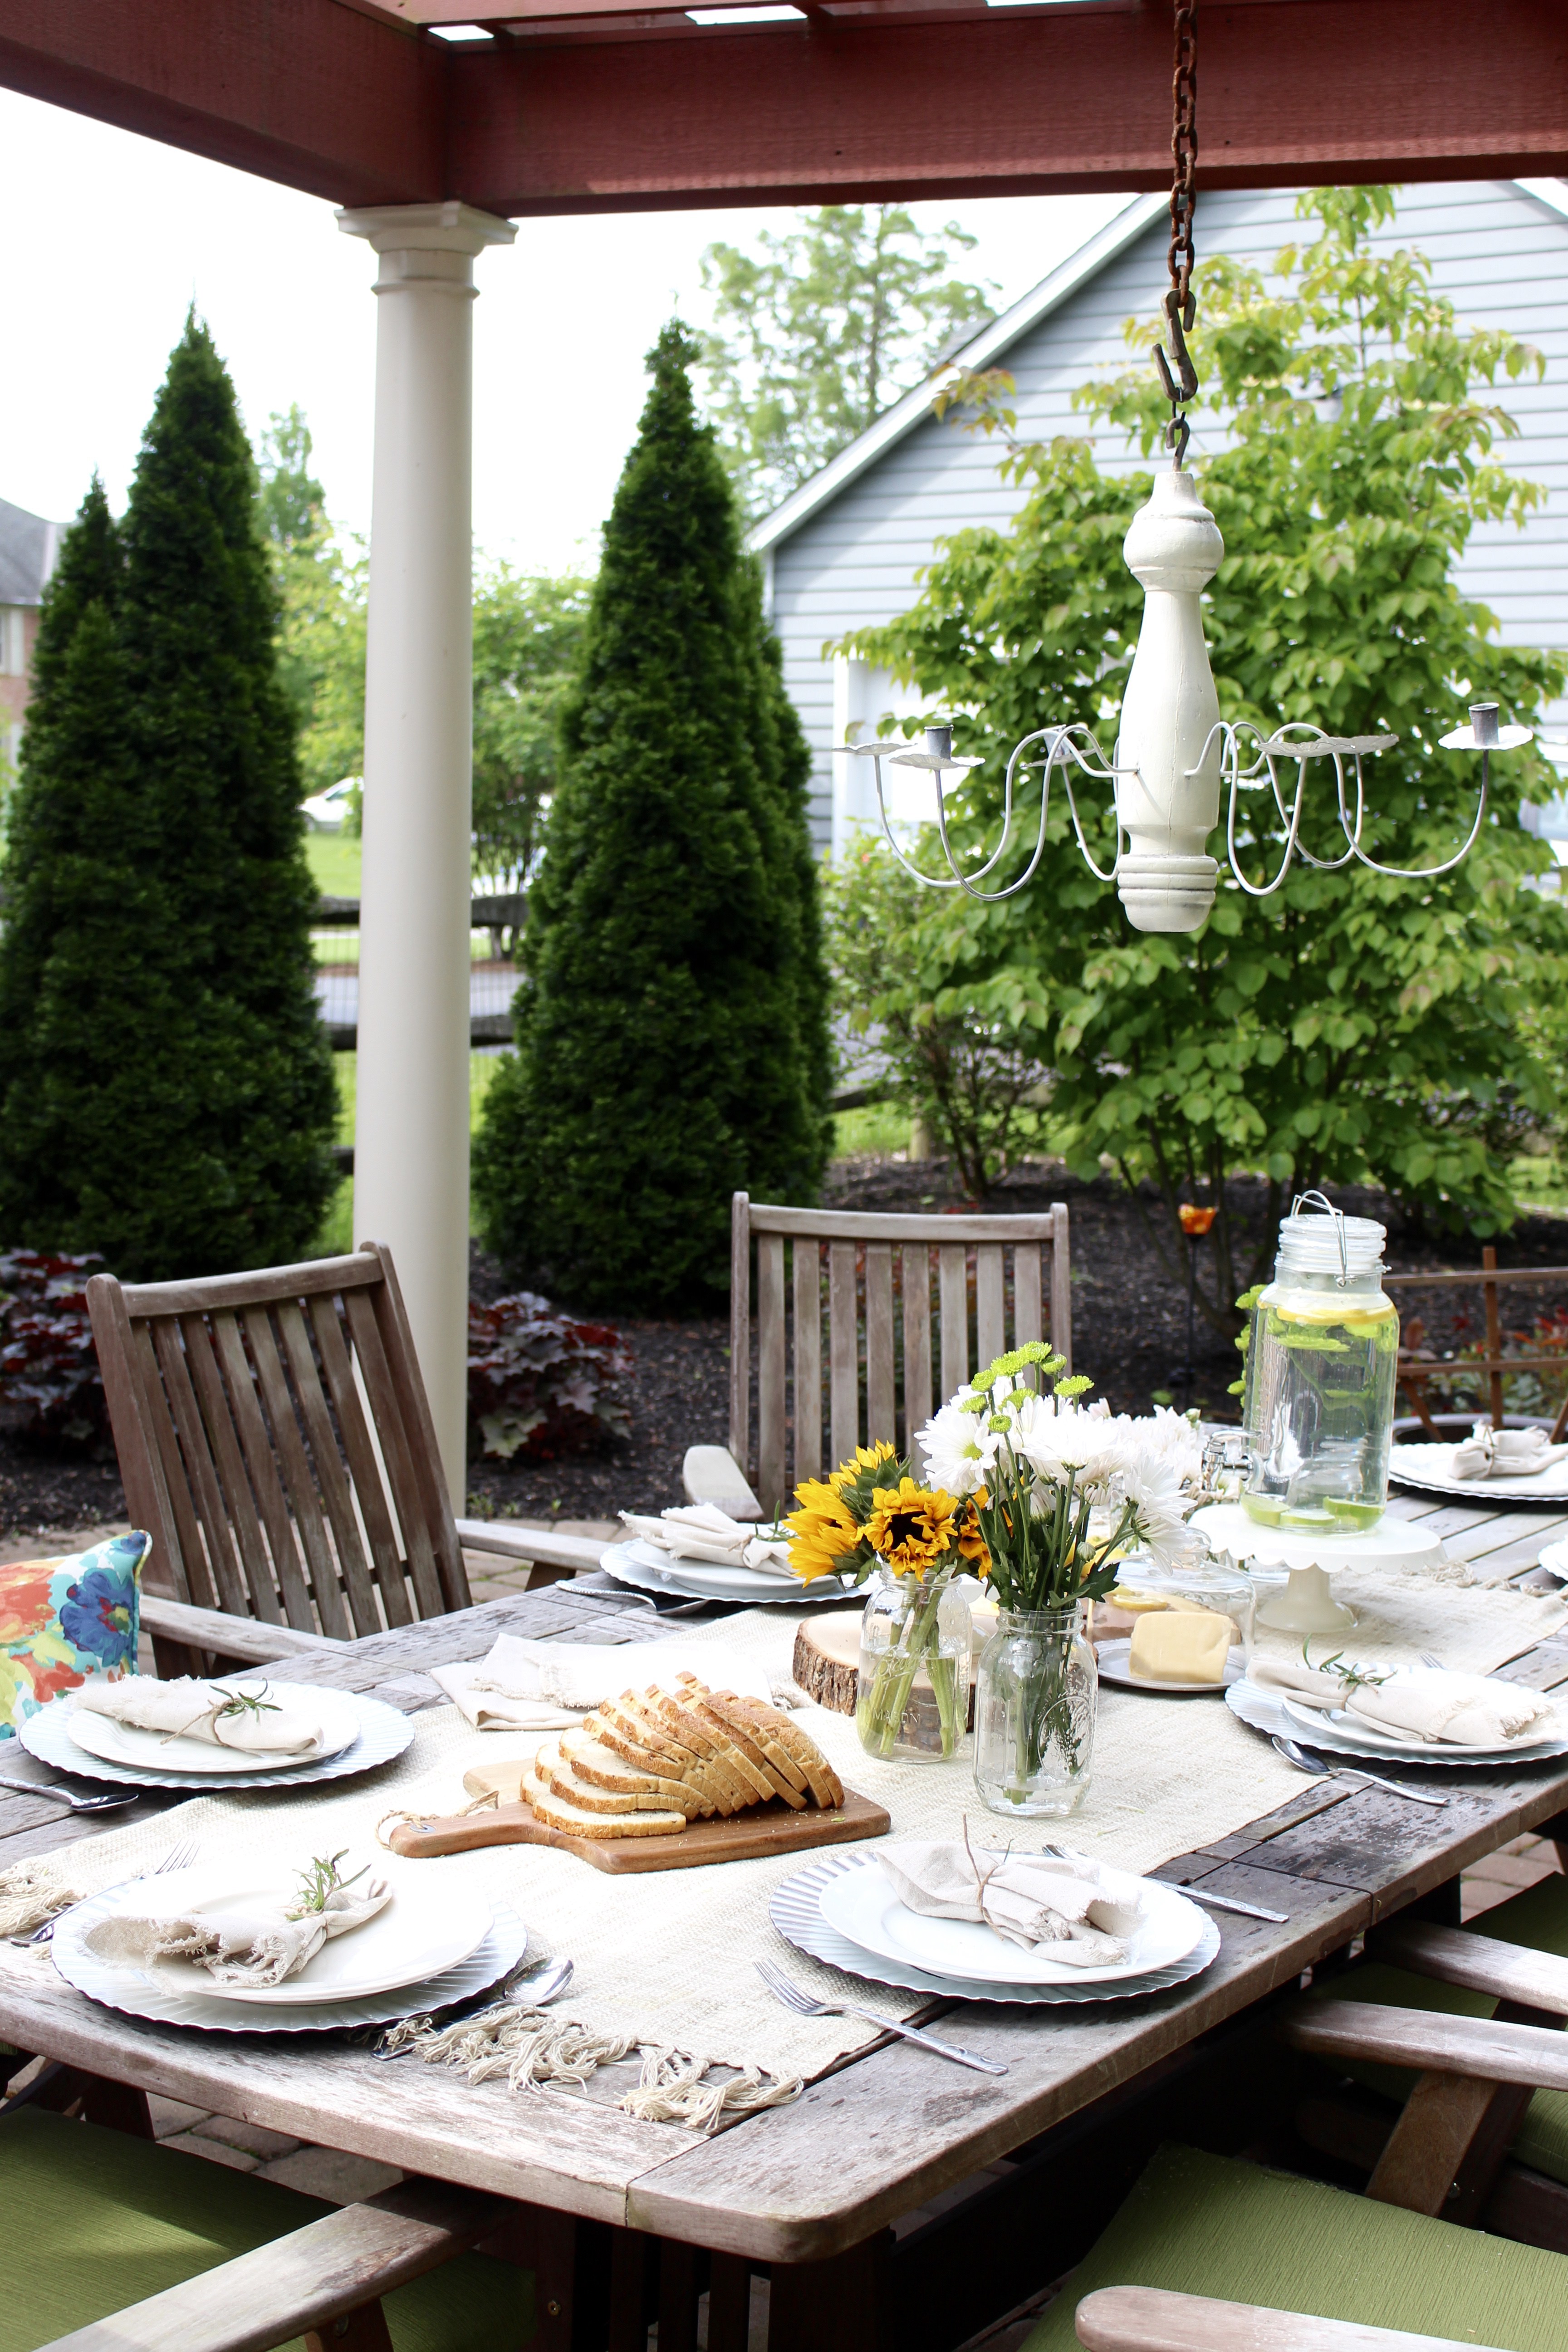 Wrap cloth napkins with summery twine and fresh rosemary: Summer Patio Refresh 